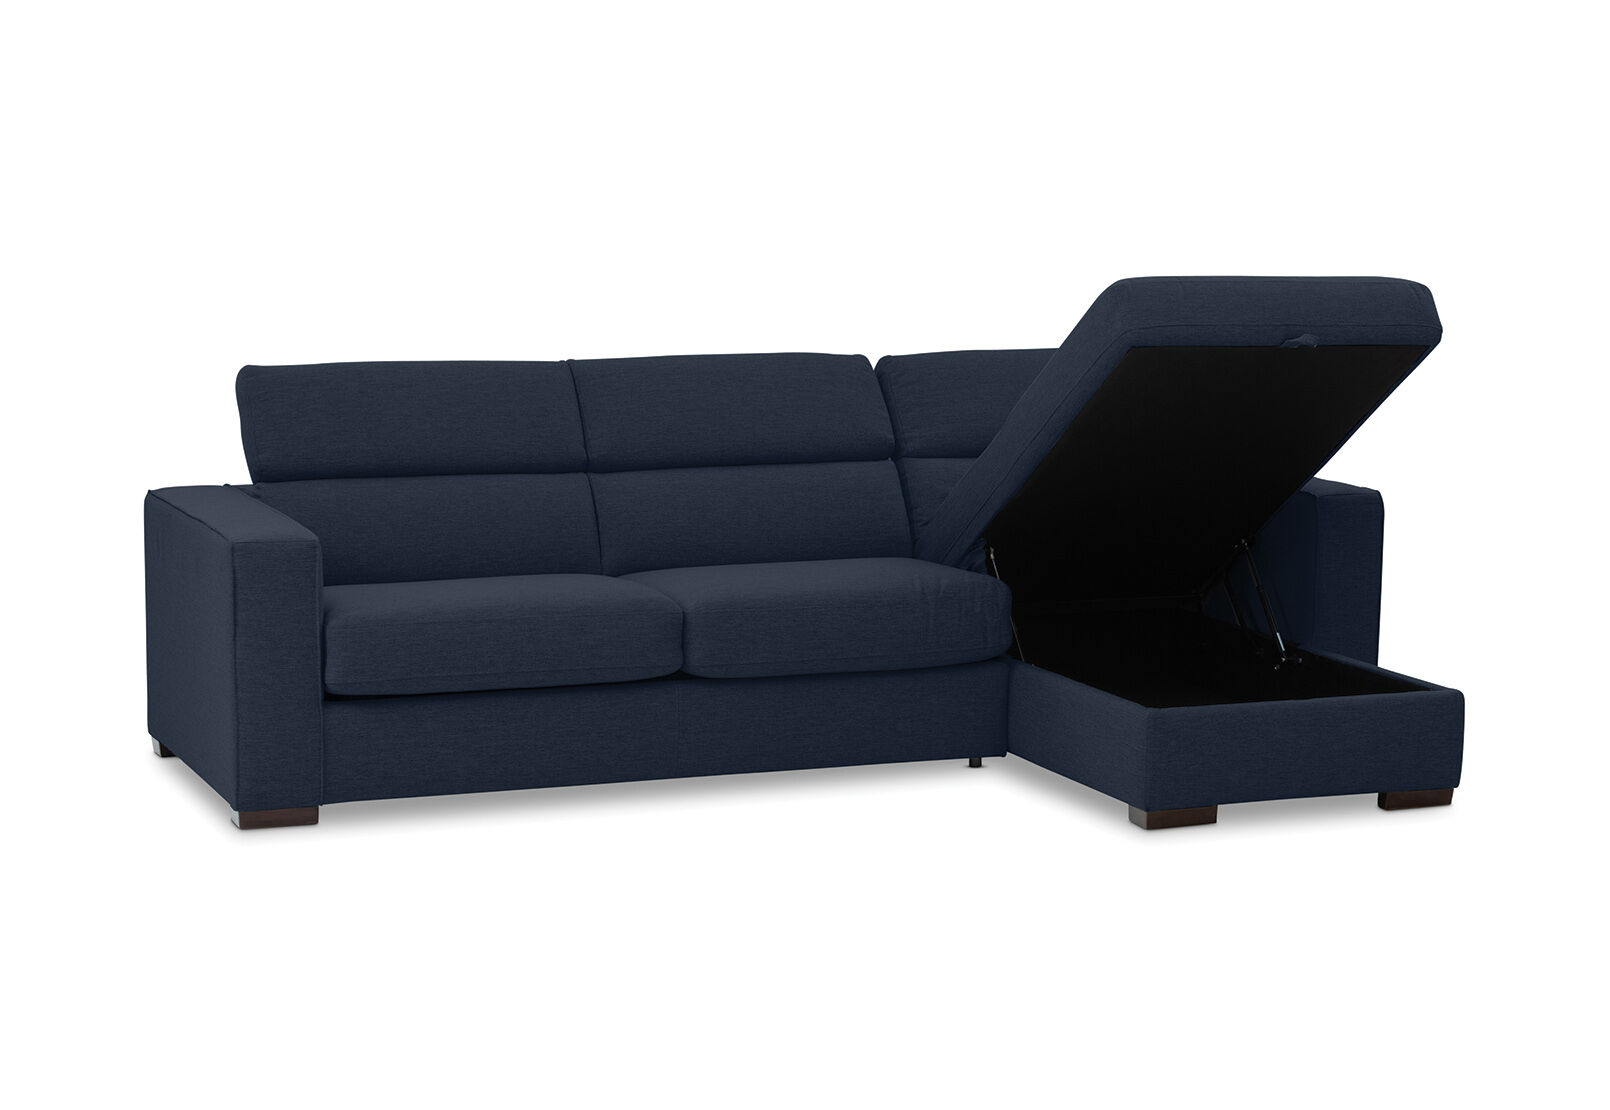 amart sofa bed review